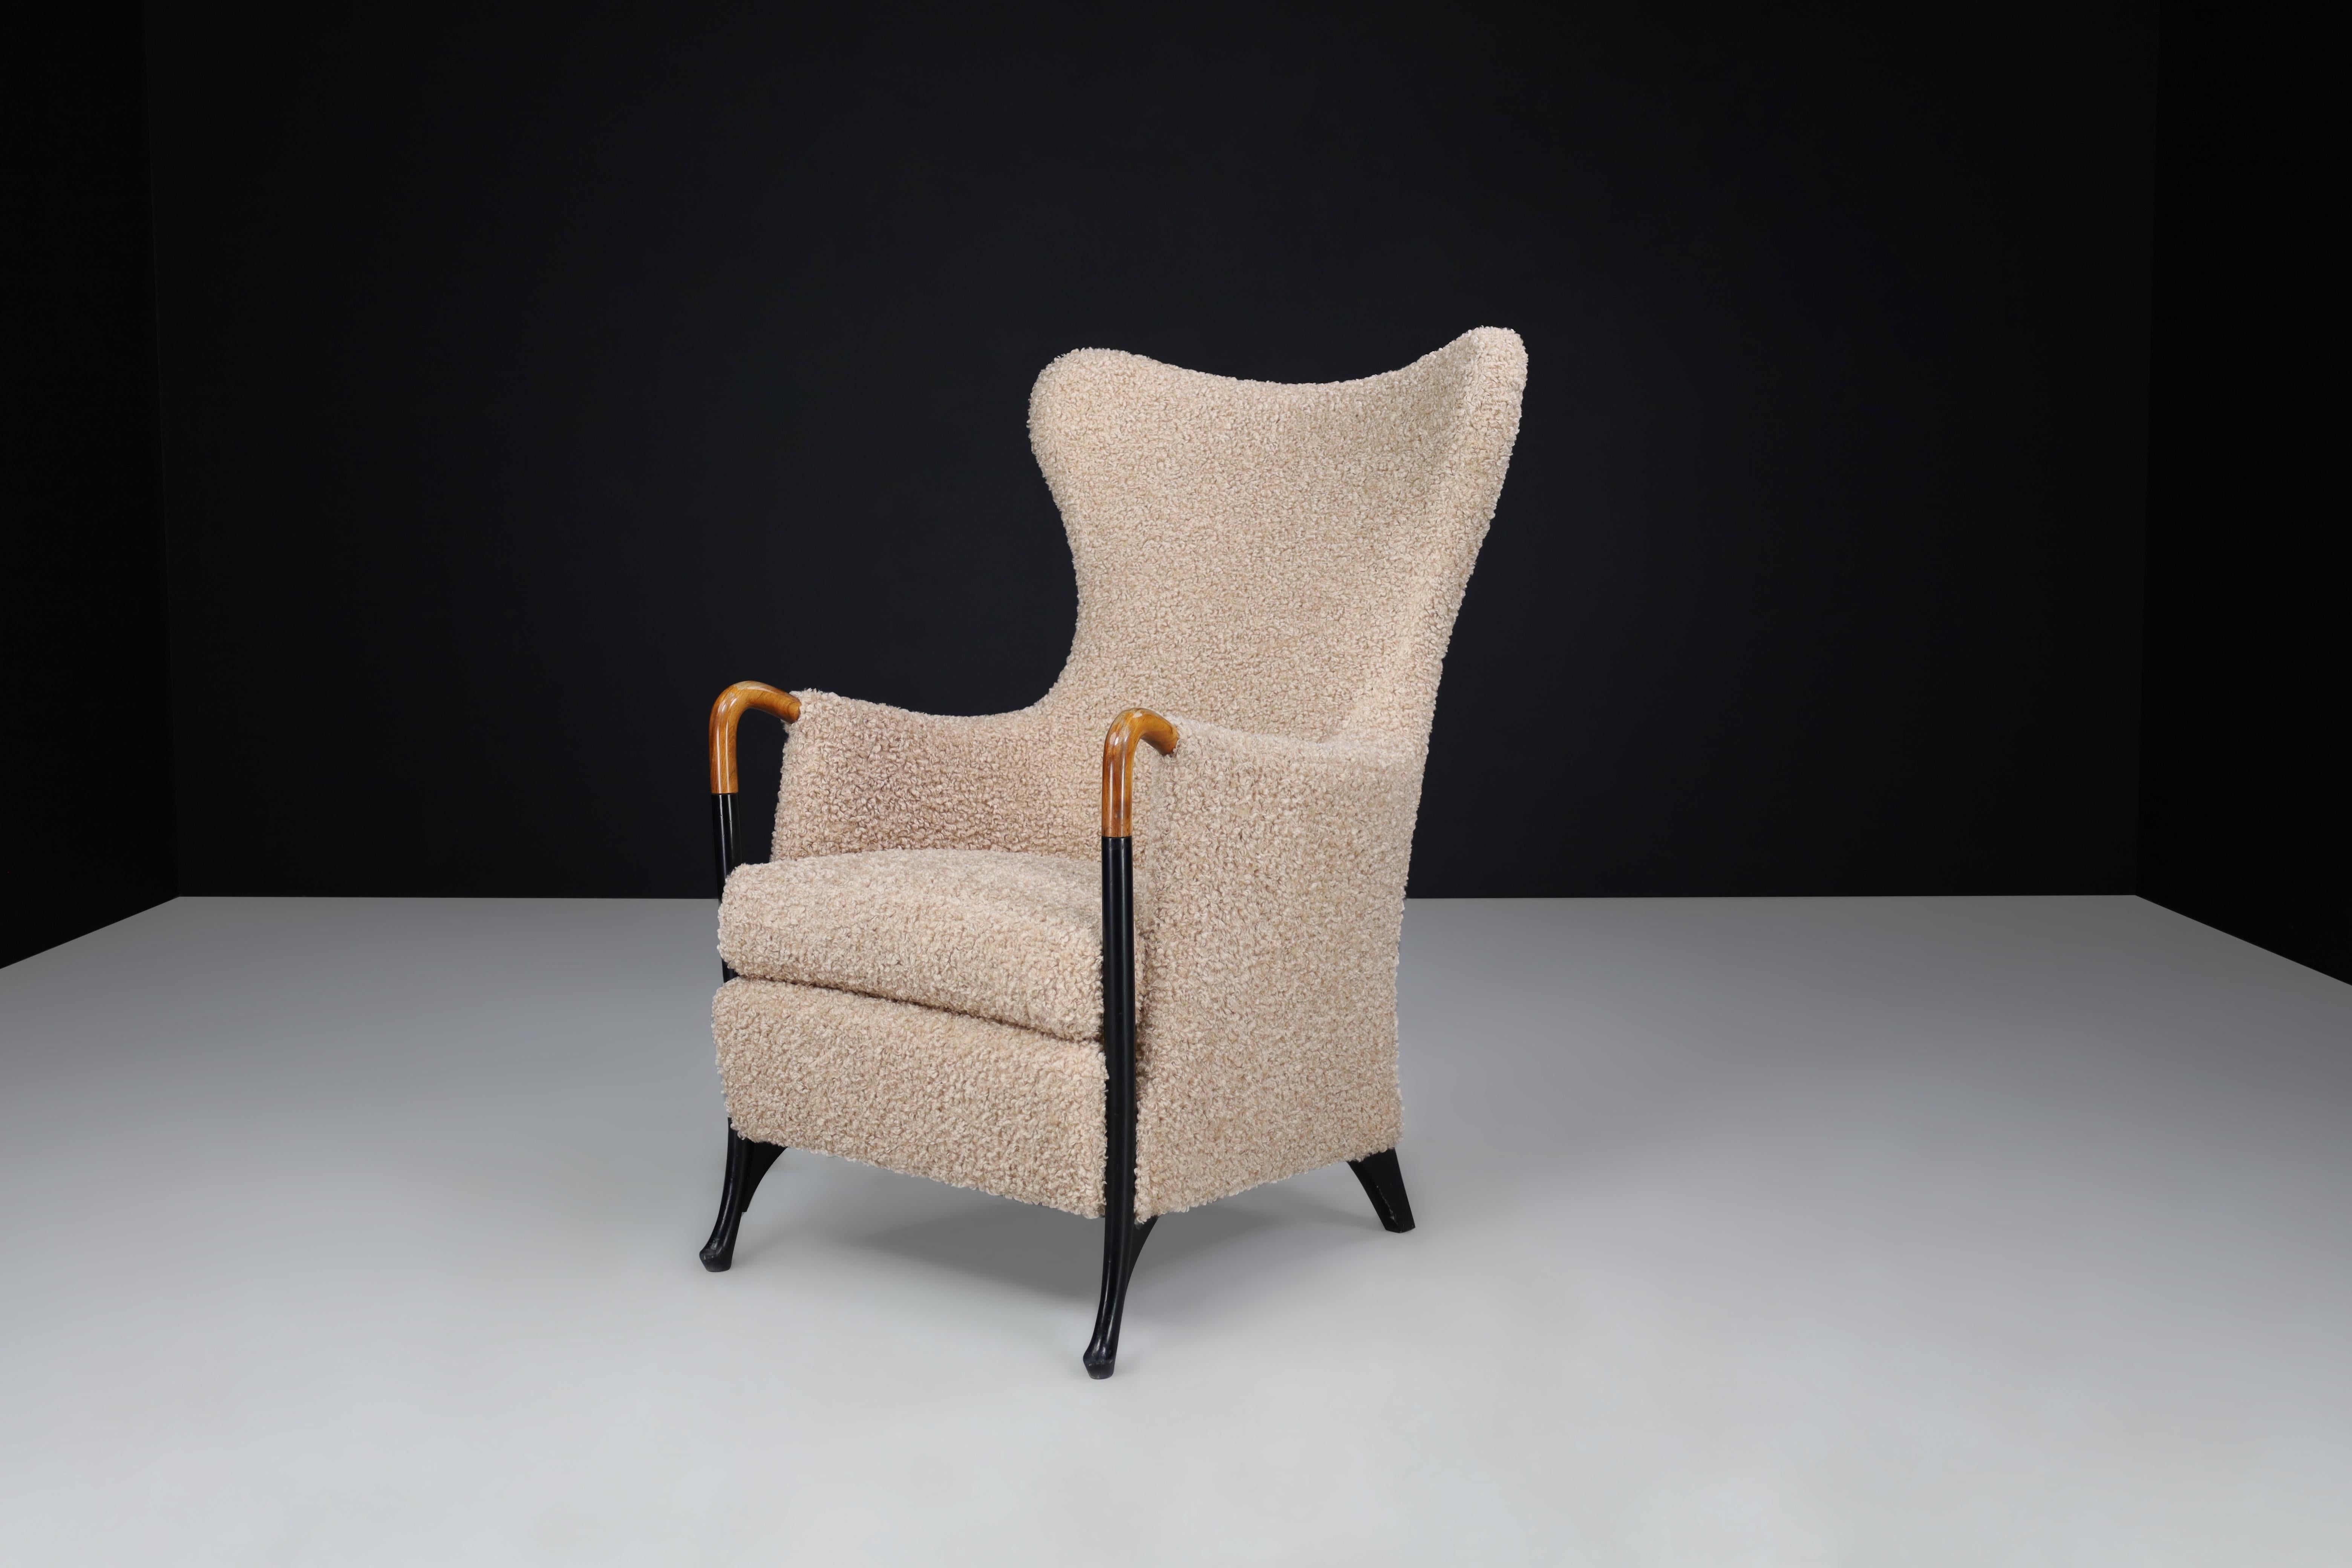 Umberto Asnago wingback chair for Giorgetti-Progetti, Italy, 1980s 

This is a beautiful wingback chair designed by Umberto Asnago for Giorgetti-Progetti in the 1980s. It has been upholstered with new fabric and features elegant curved wooden